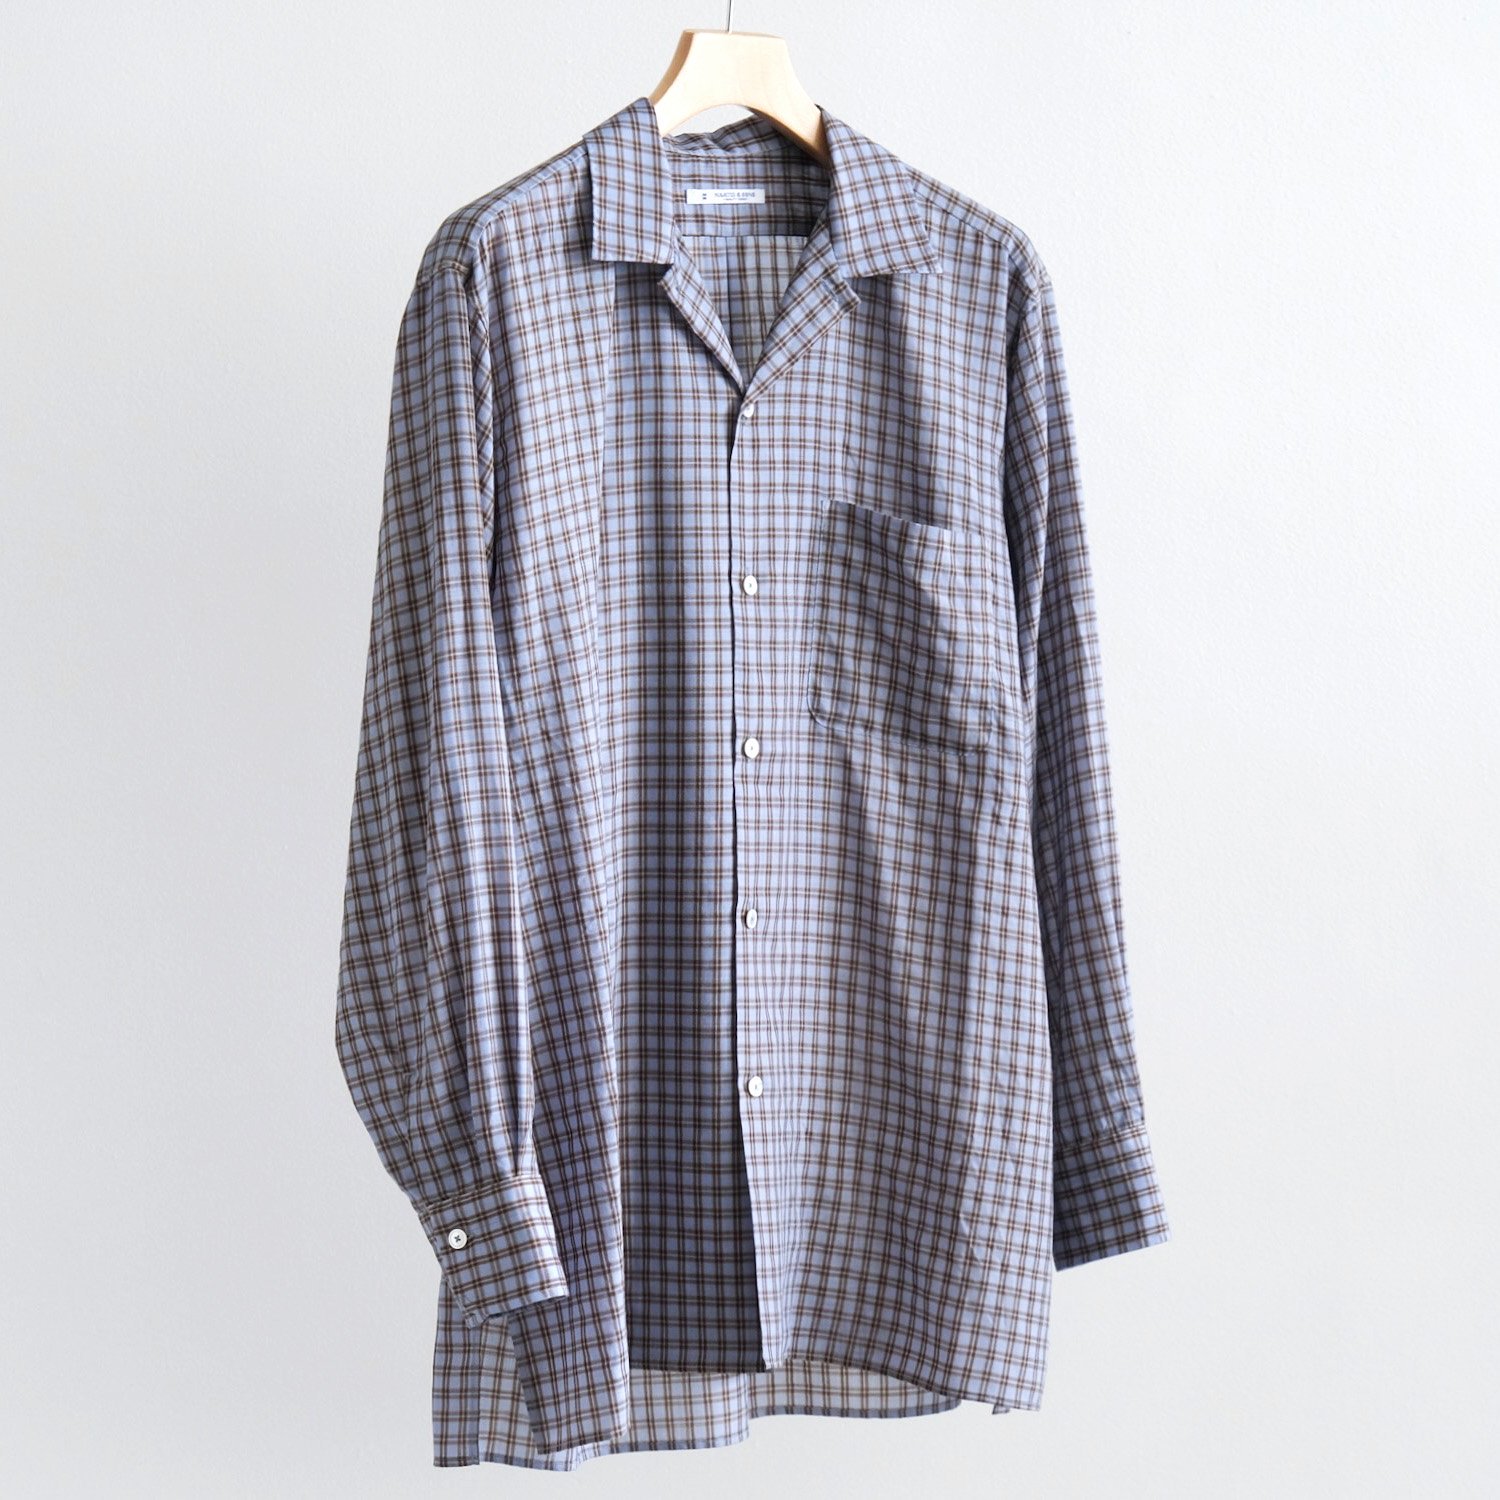 H WOOL ONE PIECE COLLAR SHIRTS [BLUE CHECK]